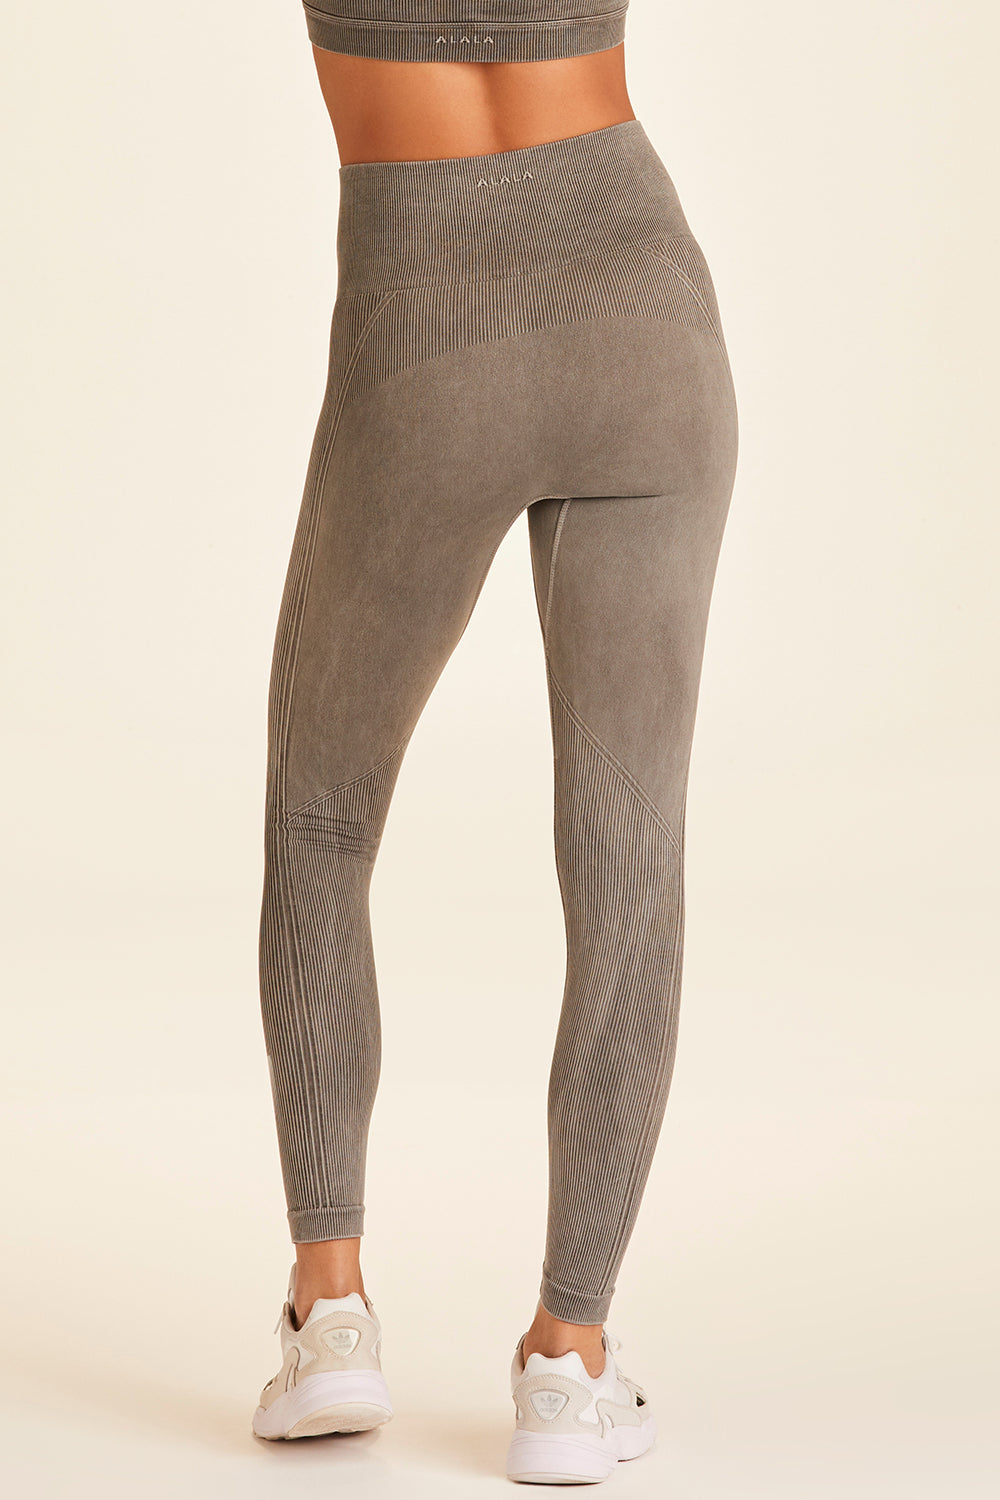 Alala Barre Seamless Tight in grey for women